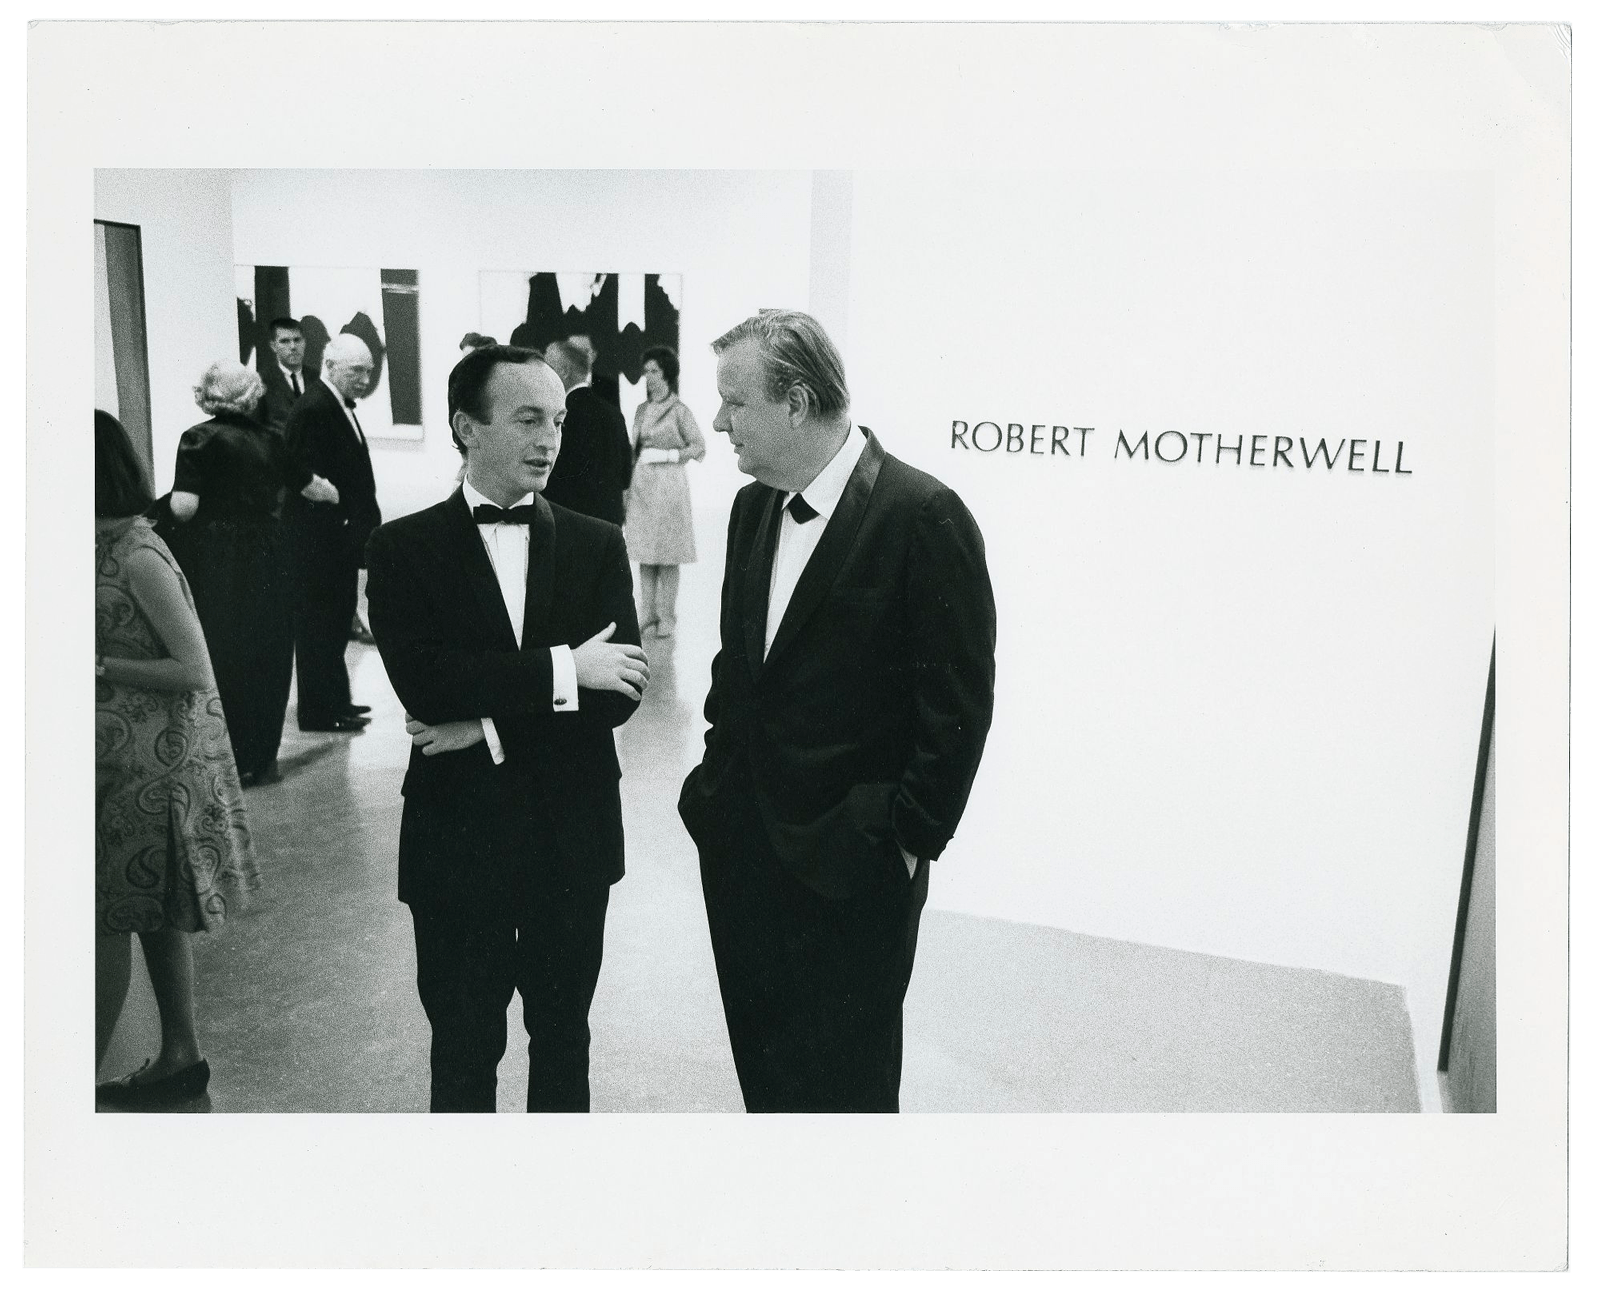 Frank O’Hara and Robert Motherwell at the opening of “Robert Motherwell” at the Museum of Modern Art in October 1965